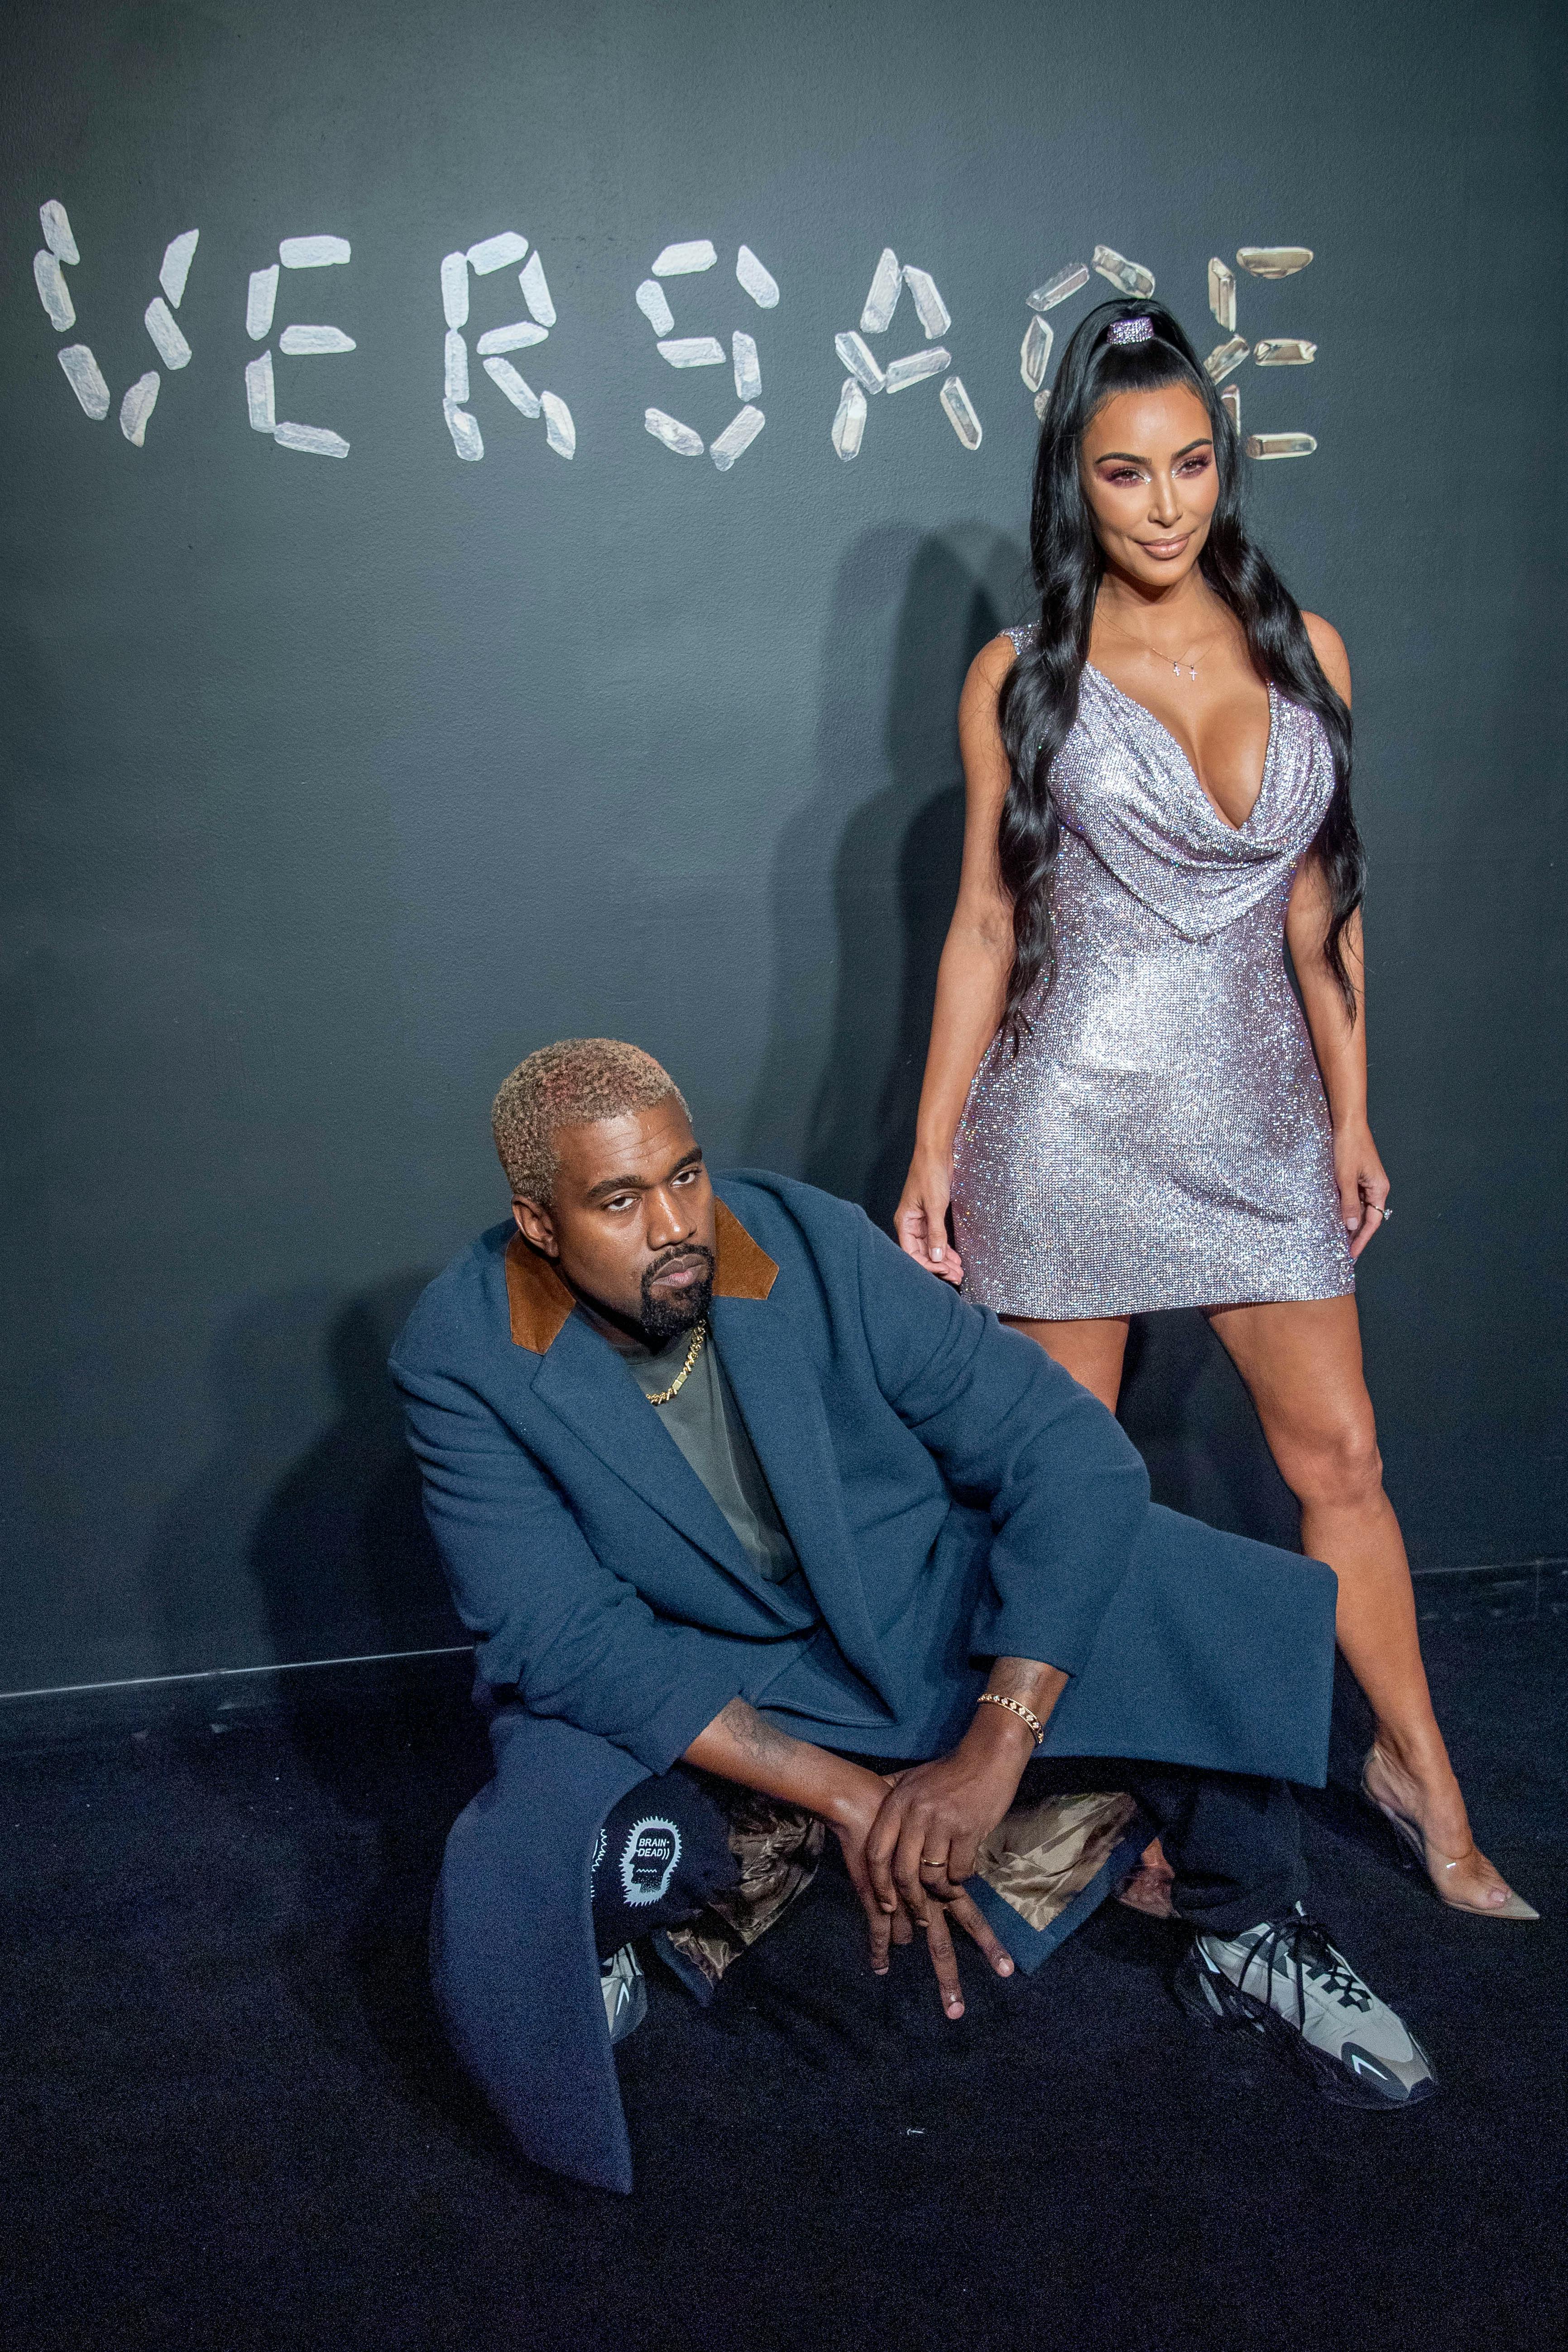 Kanye West and Kim Kardashian West attend the Versace fall 2019 on December 2, 2018, in New York City. (Photo by Roy Rochlin/Getty Images)